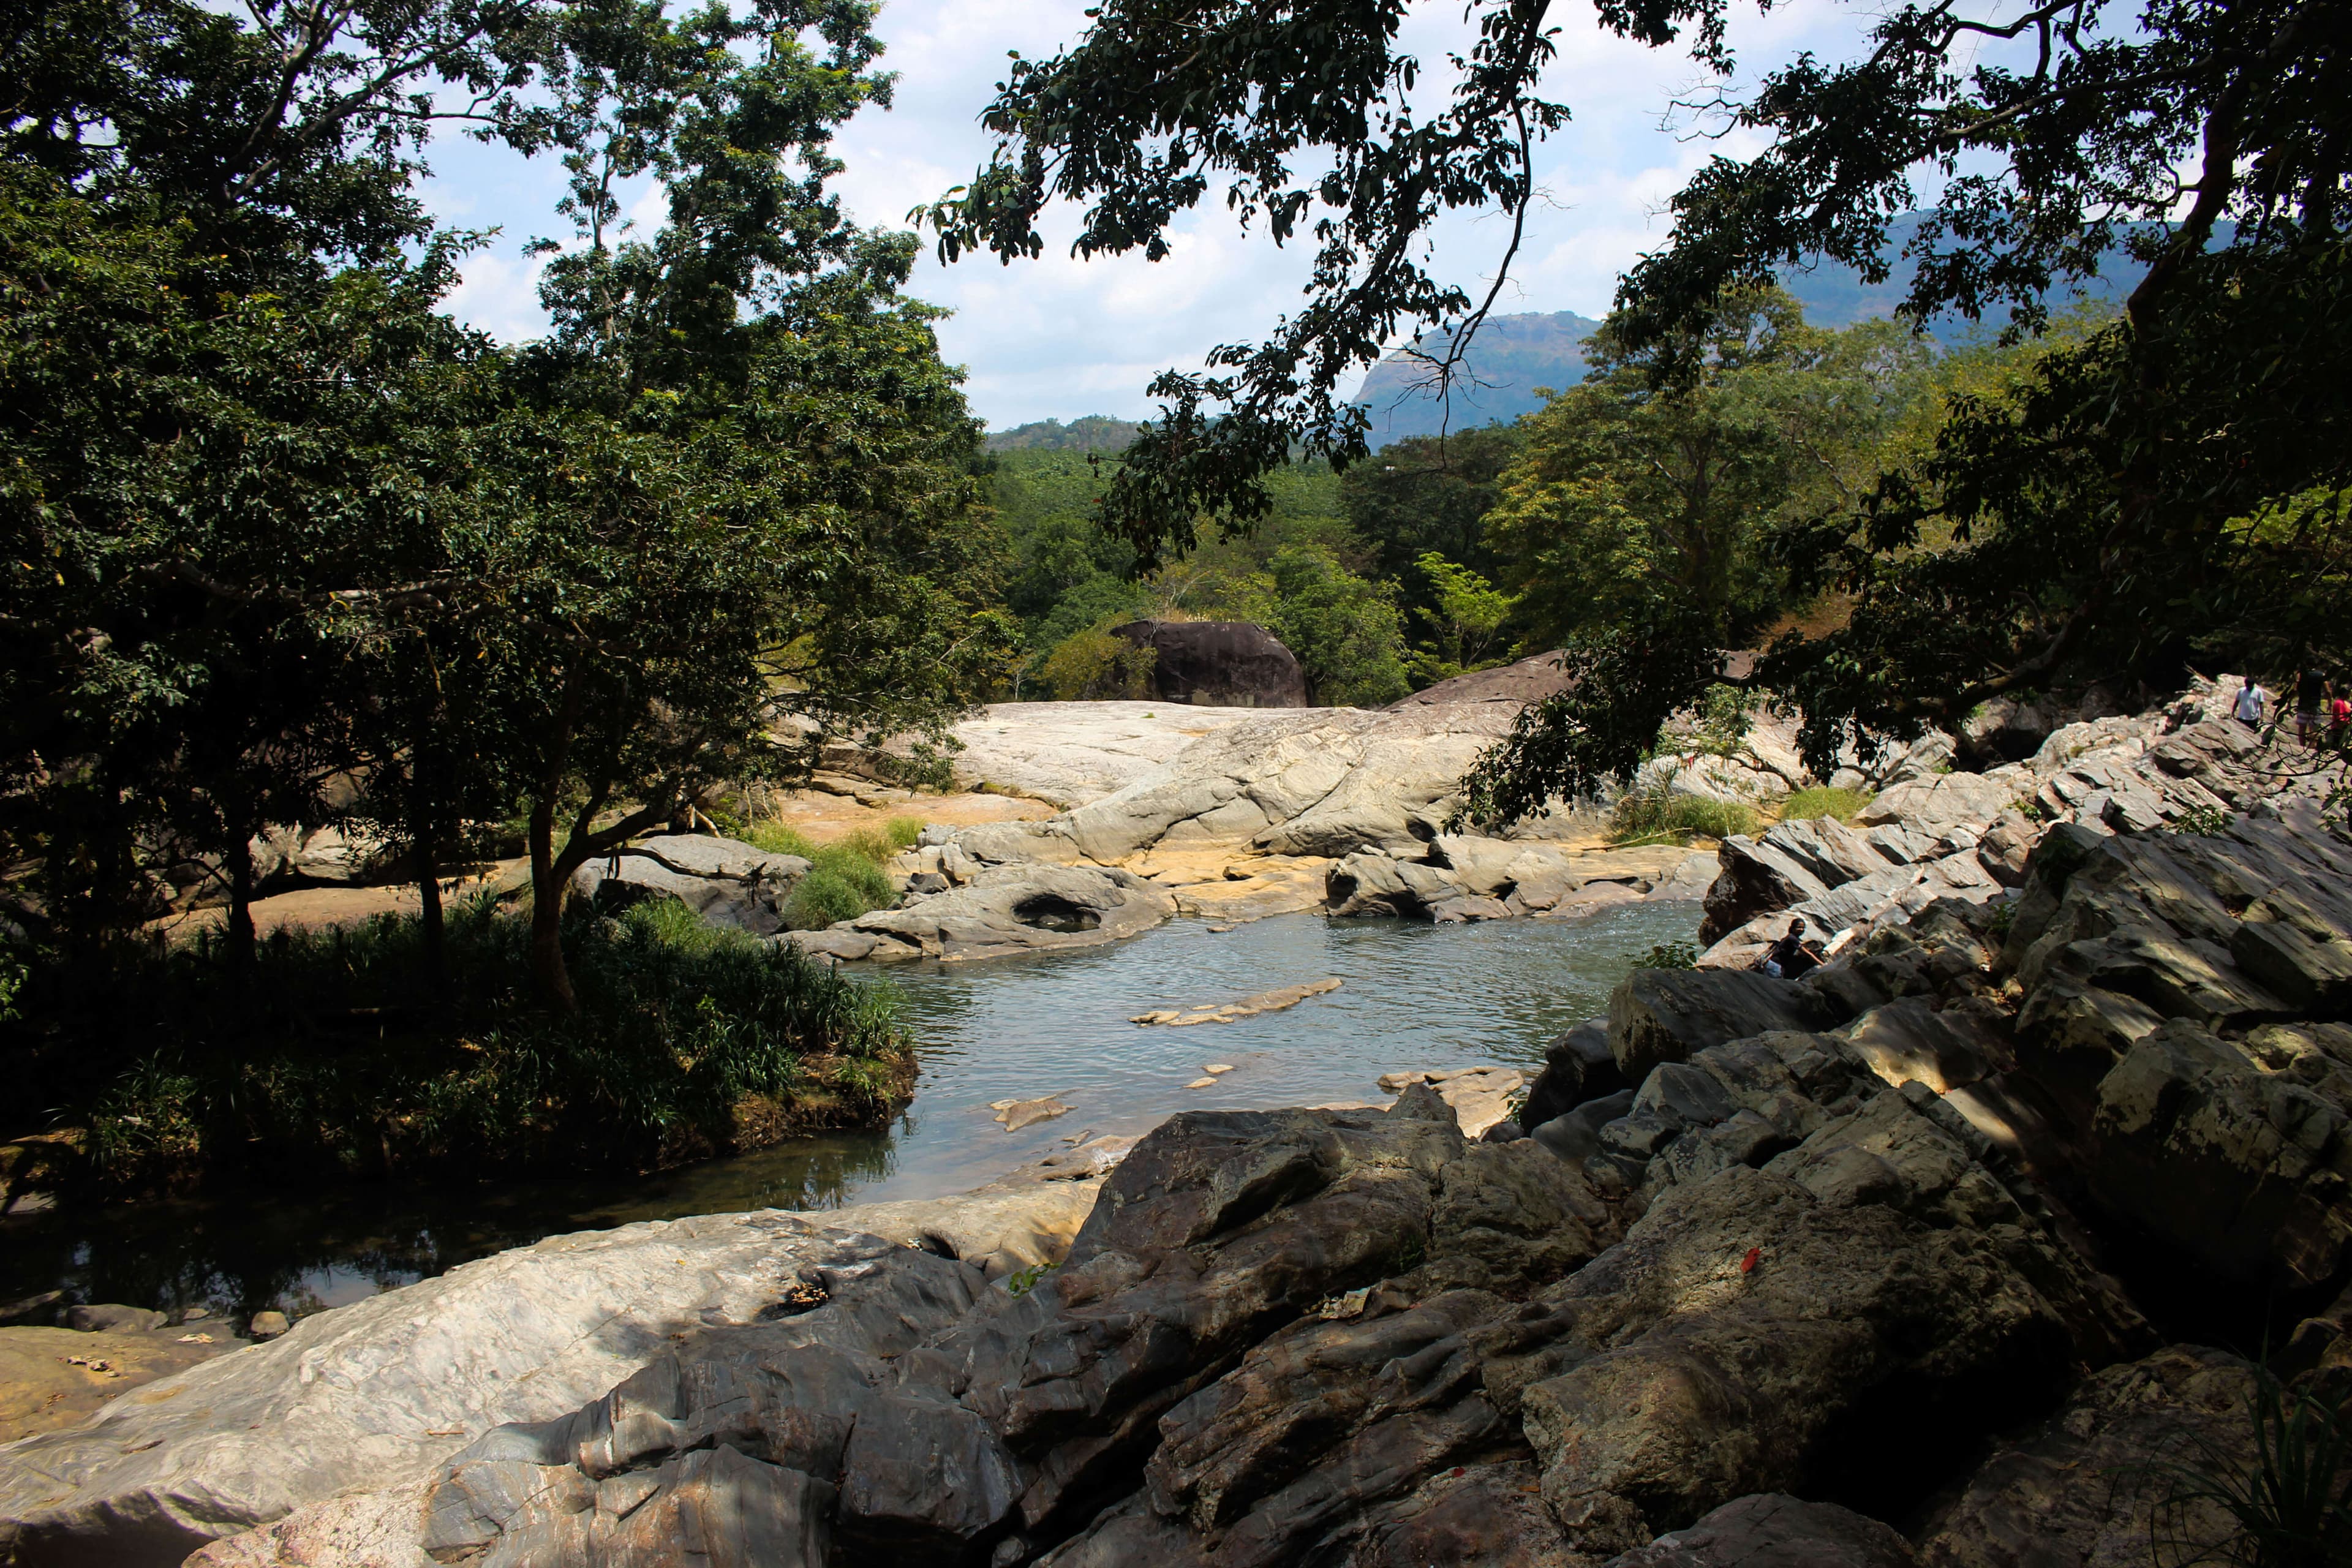 A view of natural stream in Meemure area in Sri Lanka